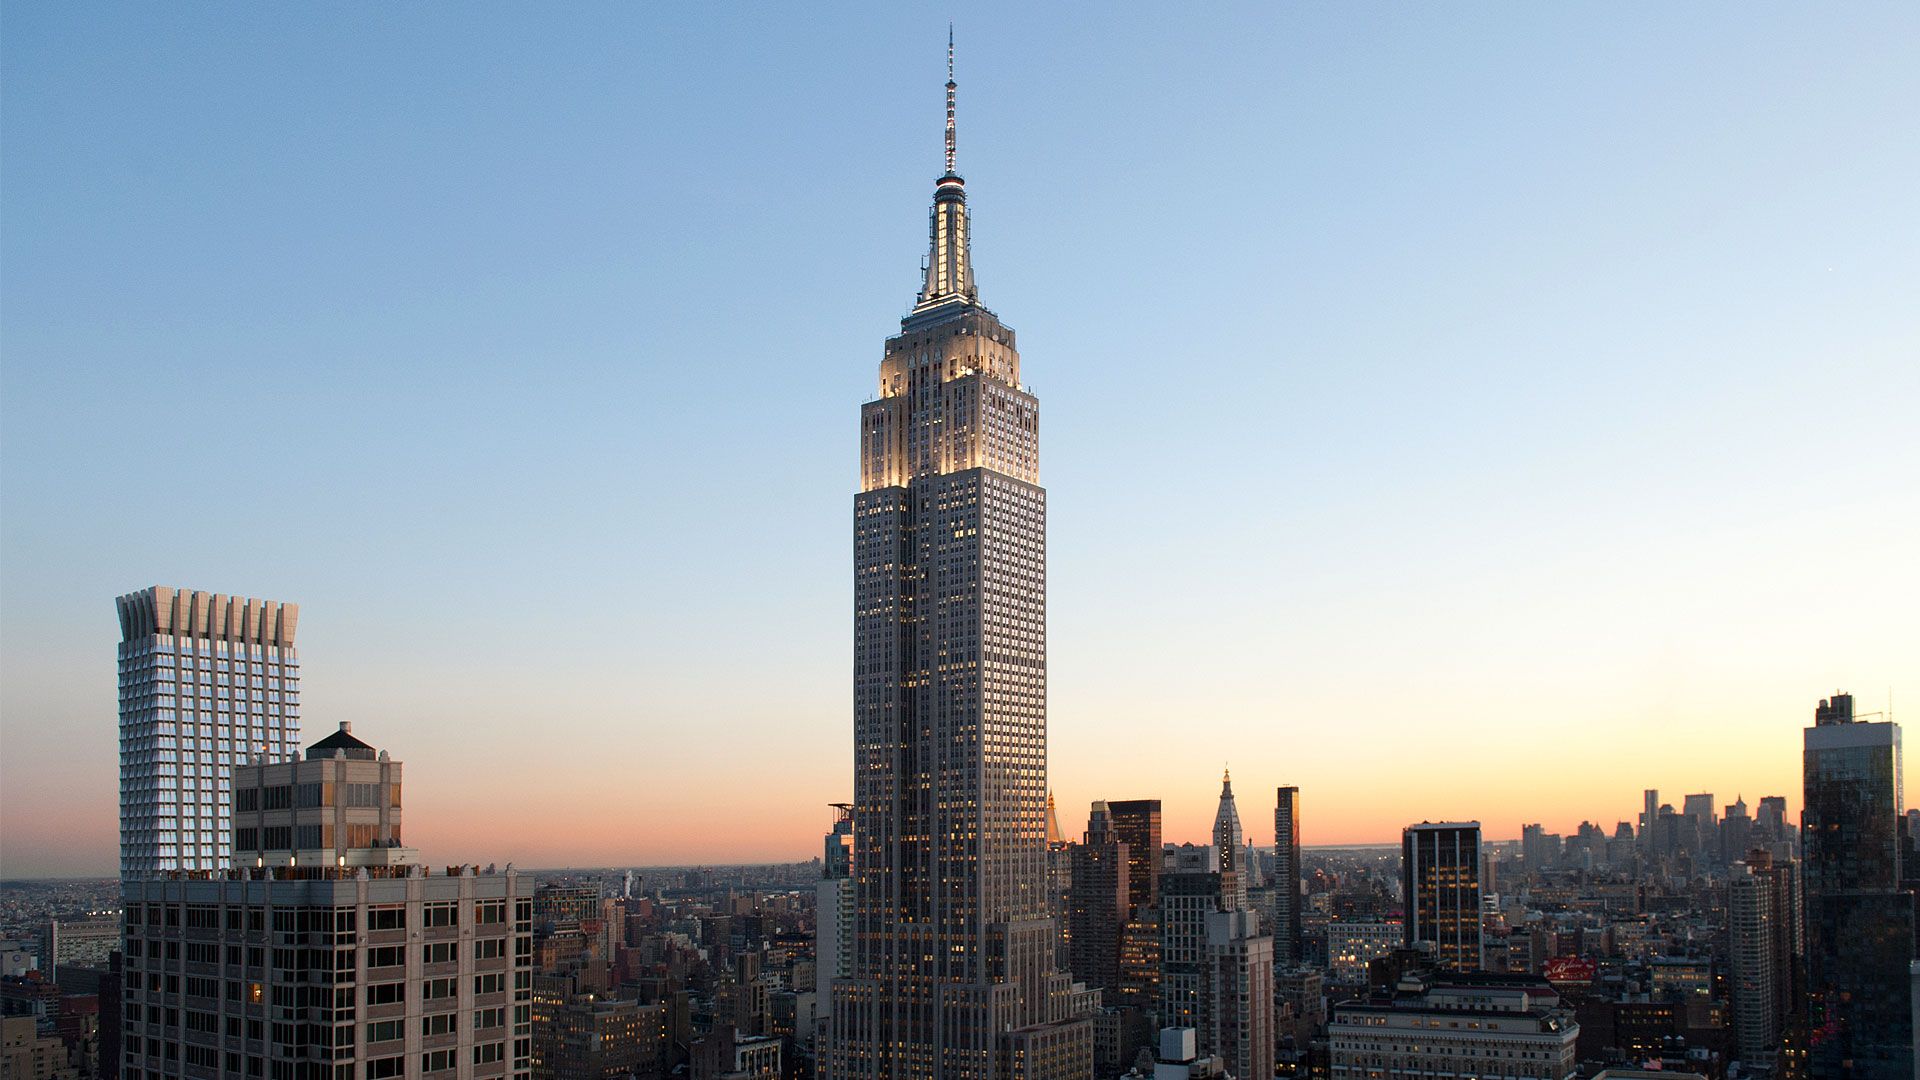 2- Empire State Building